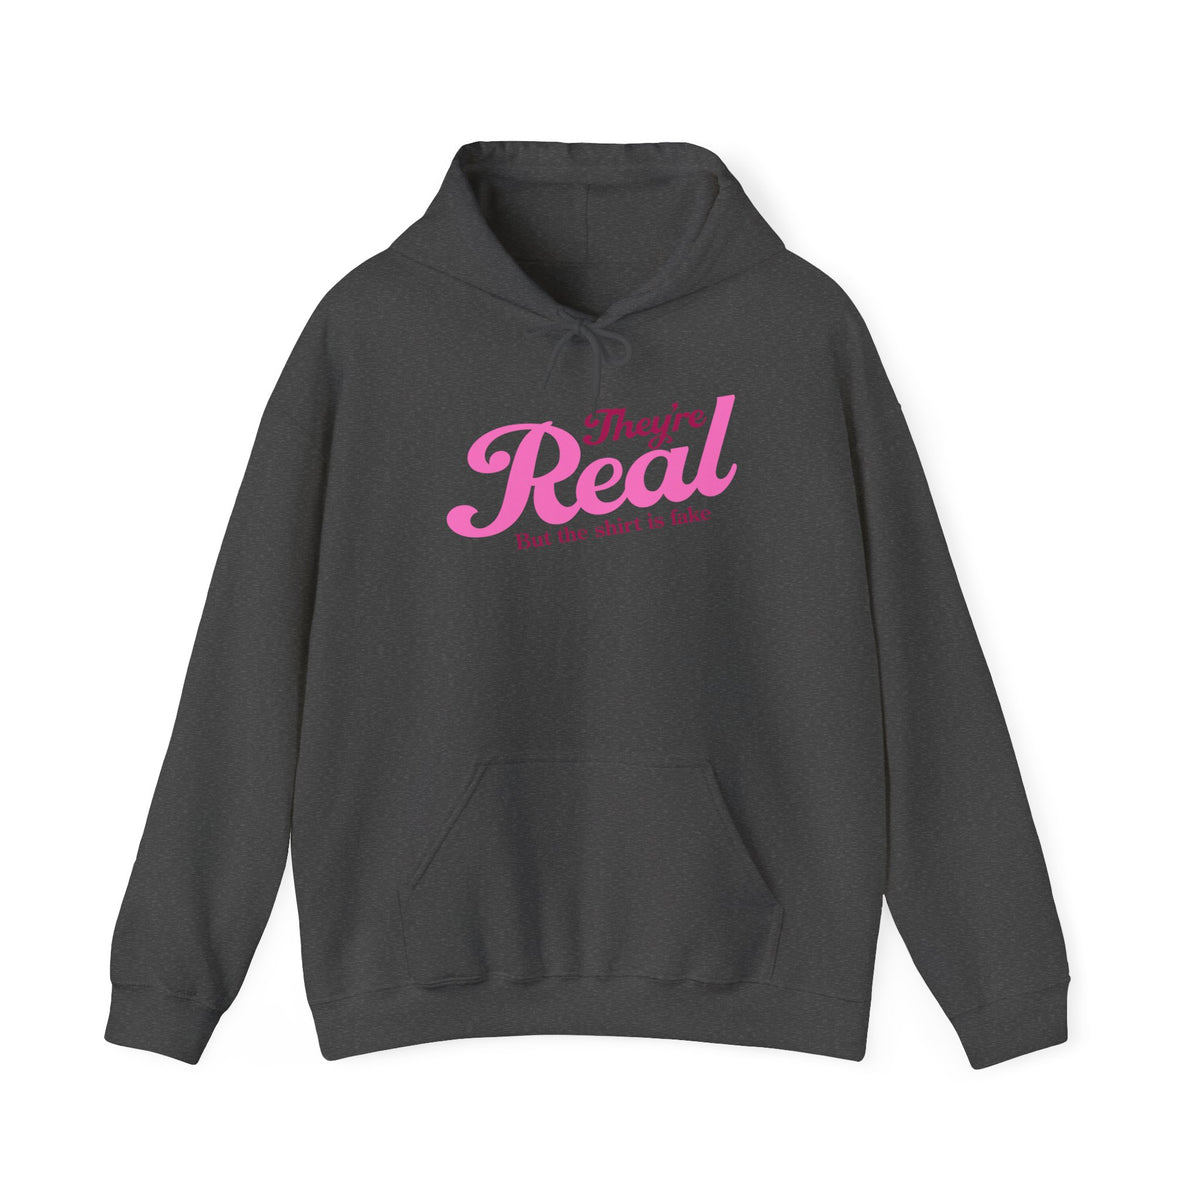 They're Real But The Shirt Is Fake - Hoodie